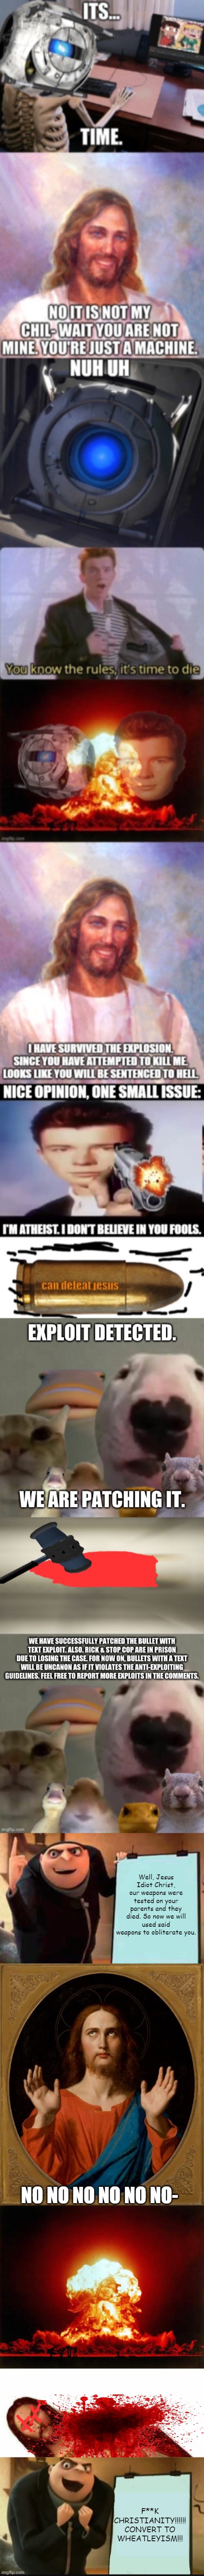 All Christians must convert to Wheatleyism. | Well, Jesus Idiot Christ, our weapons were tested on your parents and they died. So now we will used said weapons to obliterate you. NO NO NO NO NO NO-; F**K CHRISTIANITY!!!!!! CONVERT TO WHEATLEYISM!!! | image tagged in memes,gru's plan,annoyed jesus,nuclear explosion,jesus watcha doin,5 panel gru meme | made w/ Imgflip meme maker